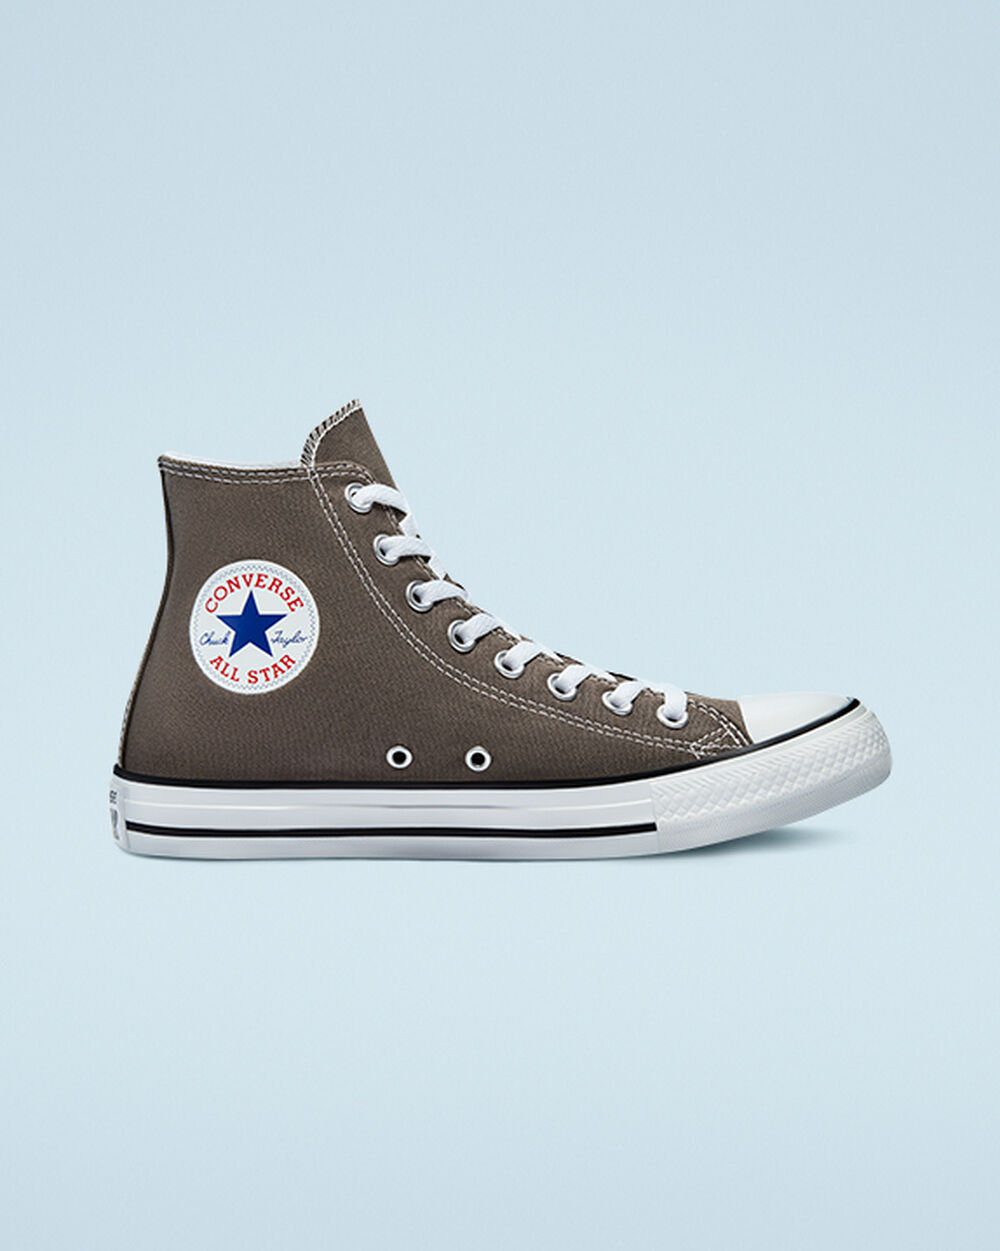 Tenis Converse Chuck Taylor All Star Mujer Grises Oscuro | Mexico-543106